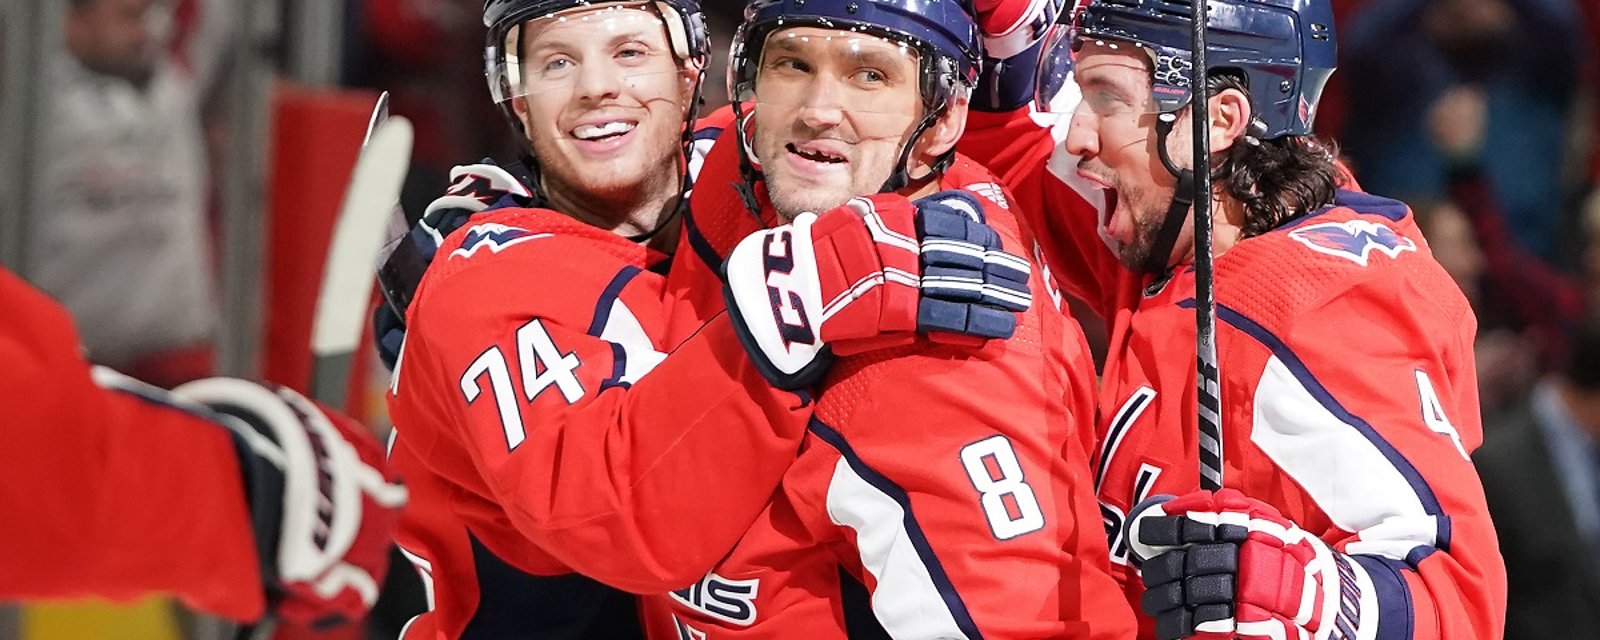 The Washington Capitals unveil a new jersey!